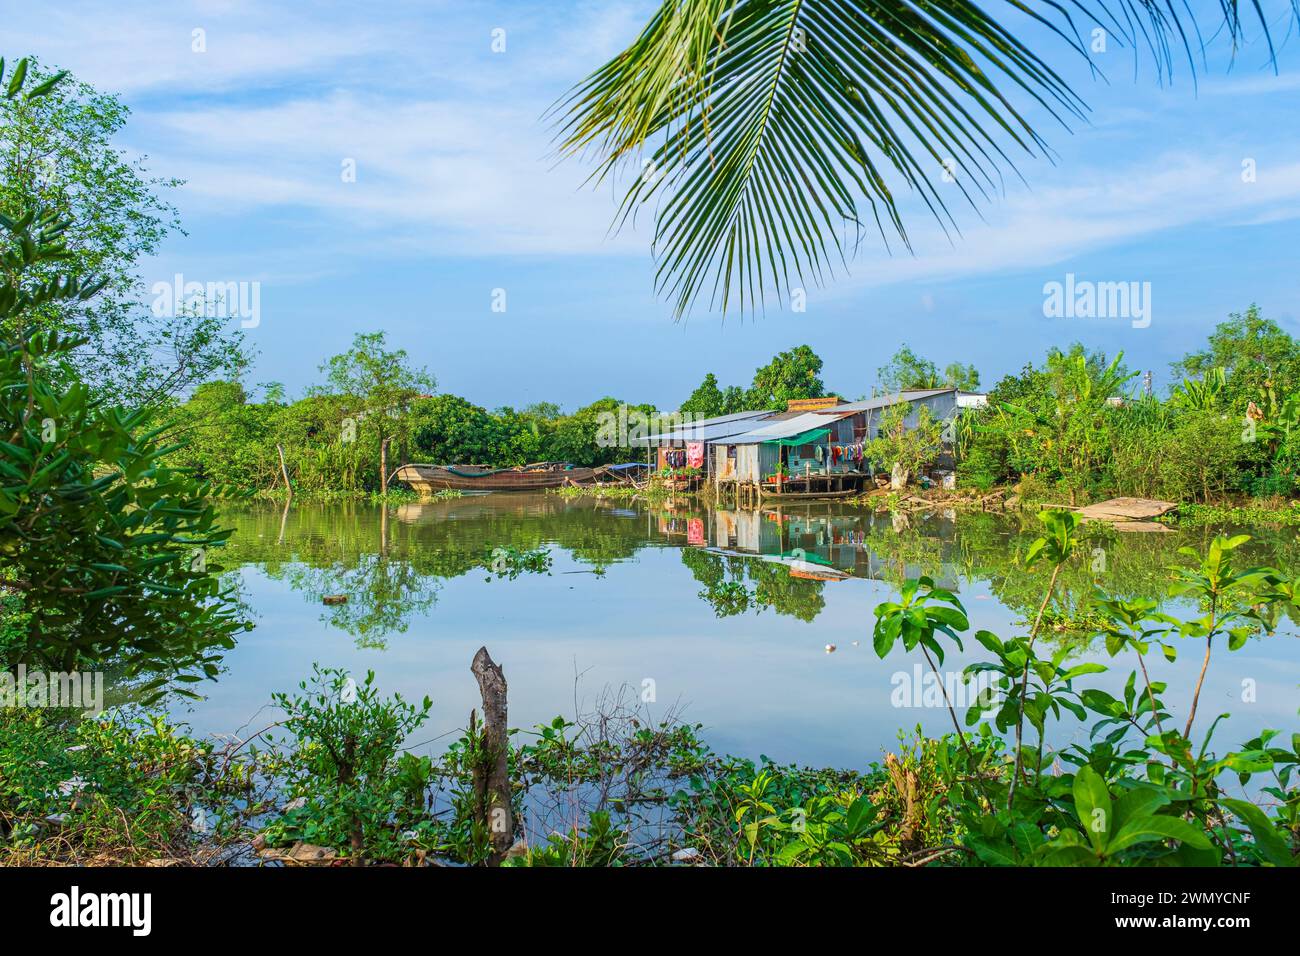 Vietnam, Mekong Delta, Vinh Long province, An Binh Island, the island is crossed by many canals or arroyos Stock Photo